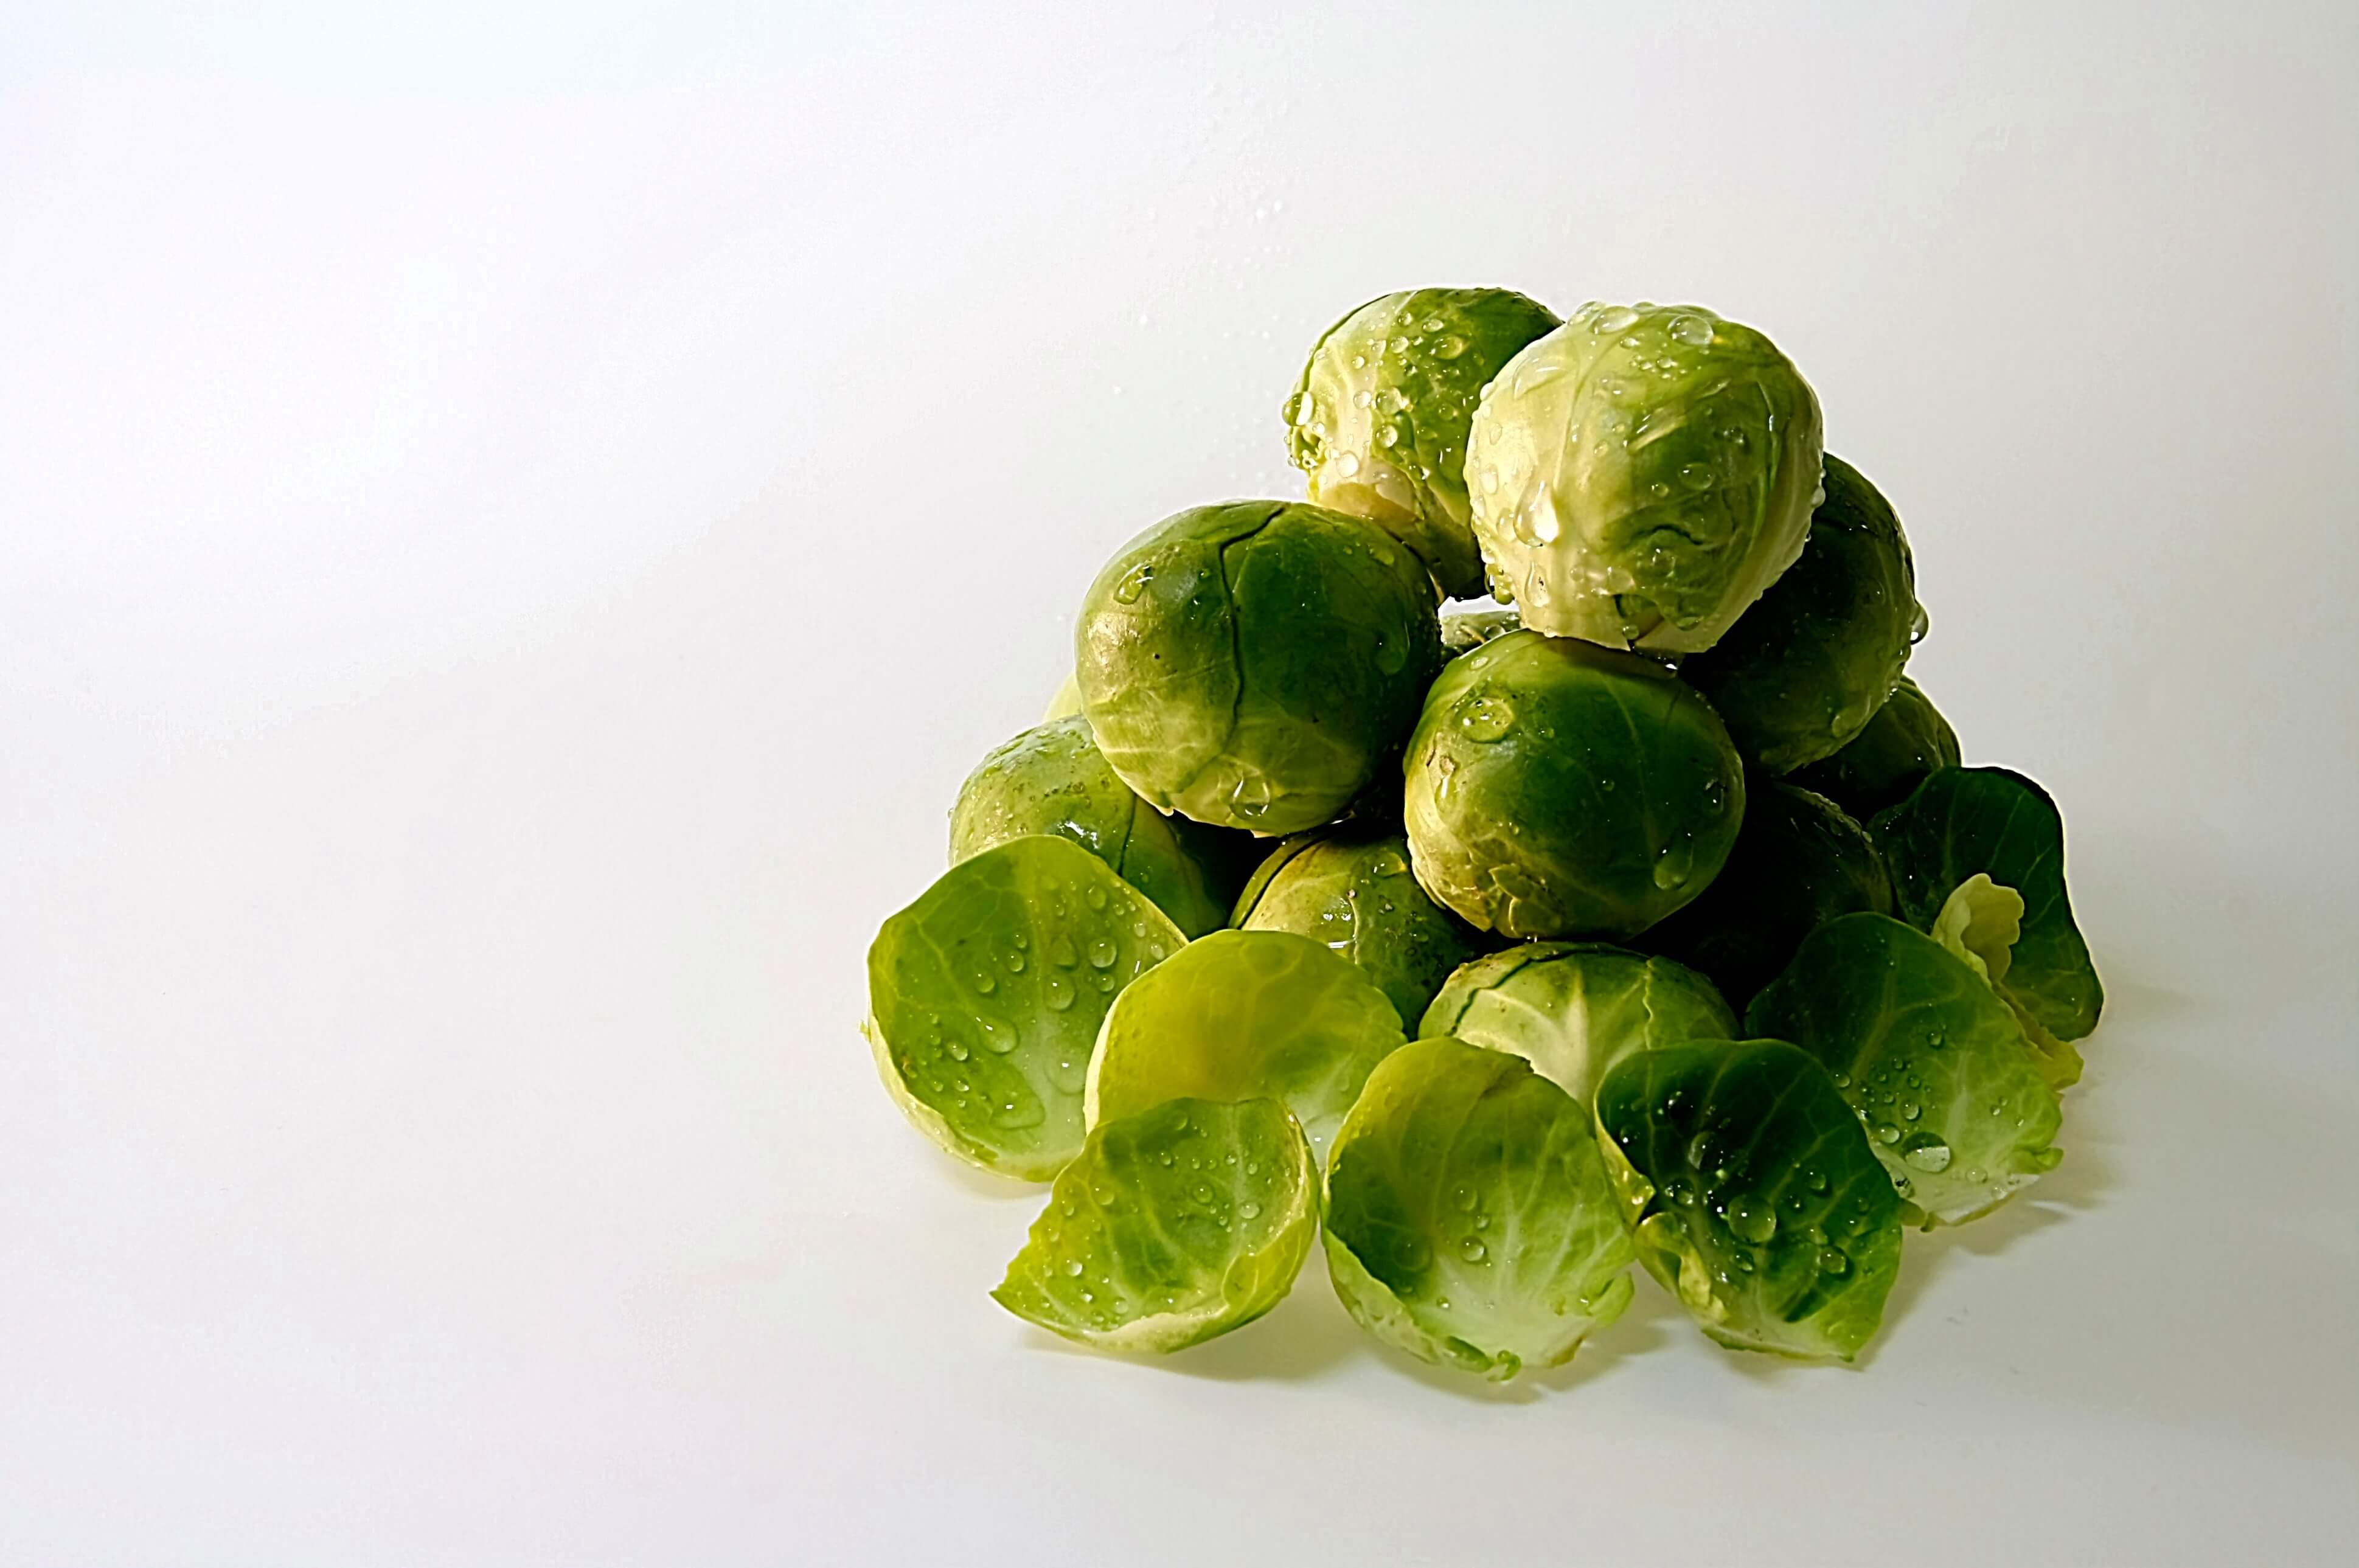 Brussel sprouts (1kg)